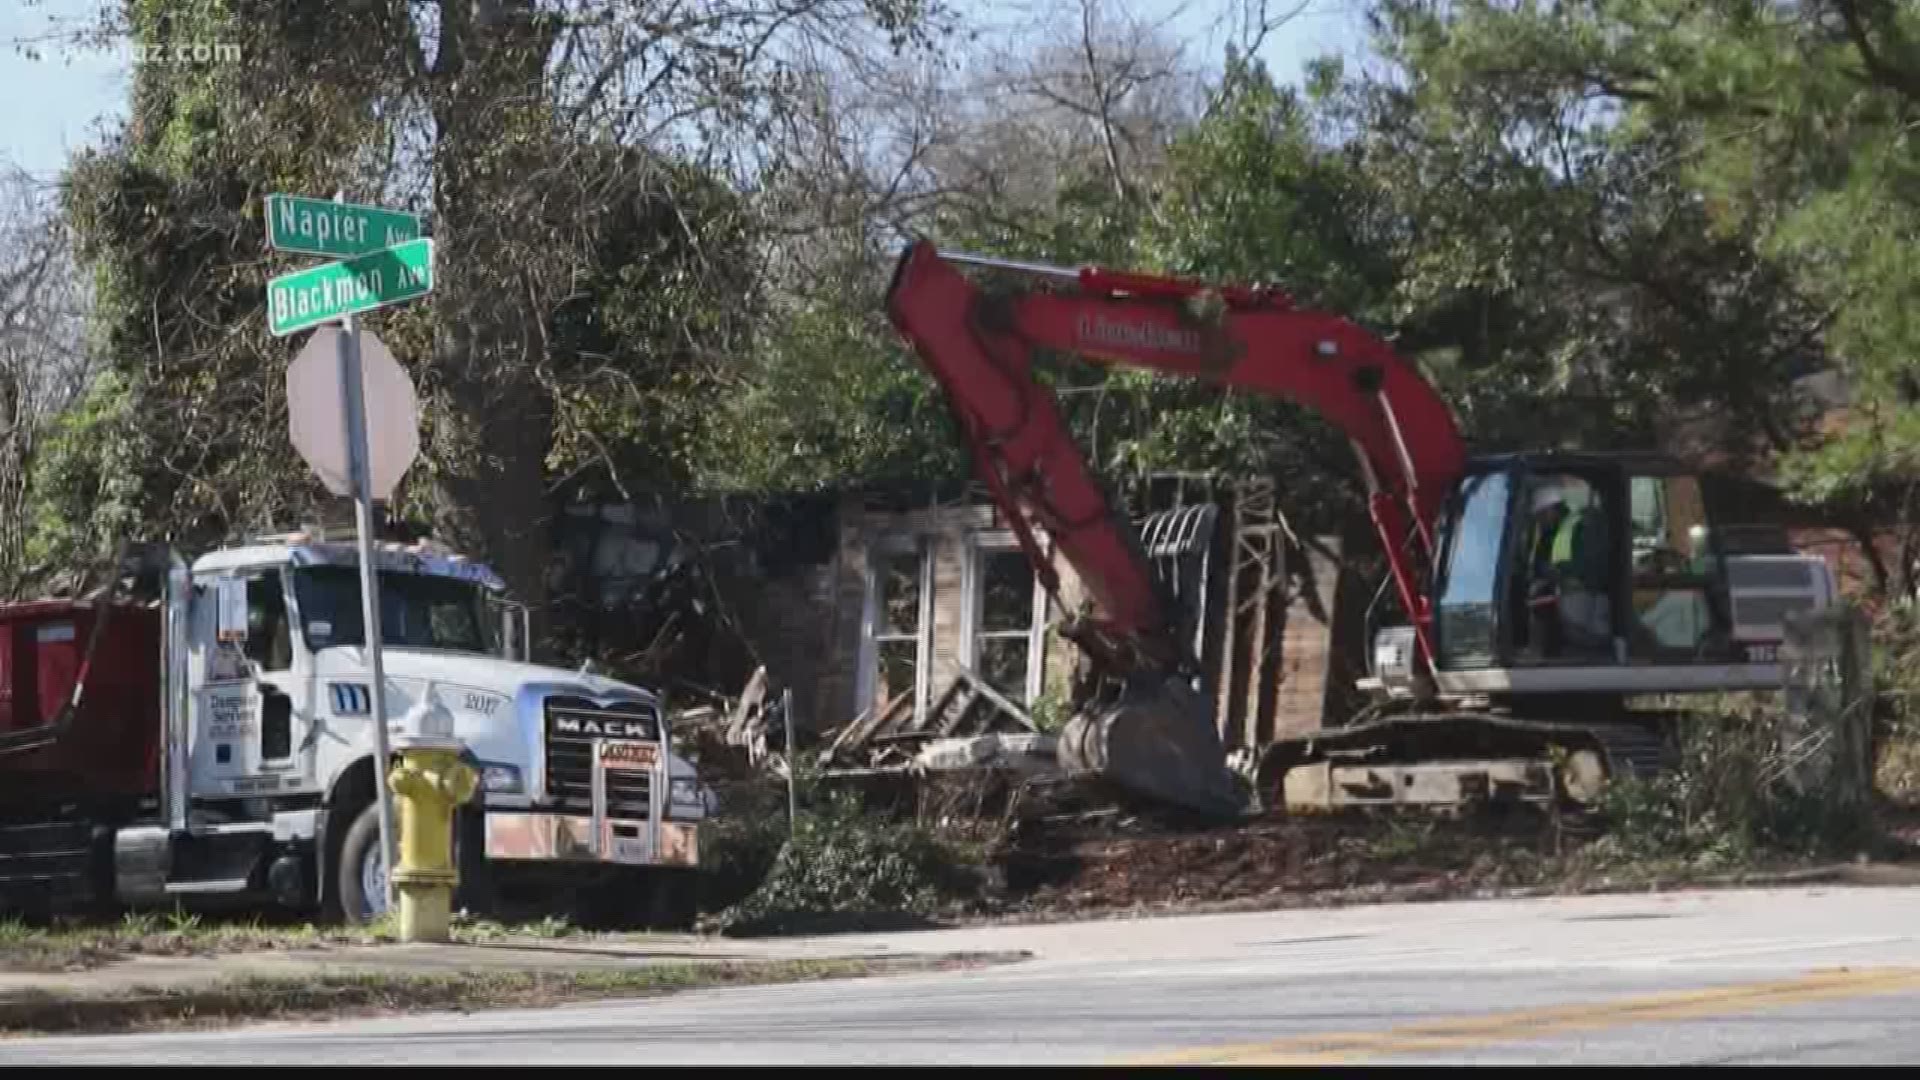 Blighted houses demolished on Napier